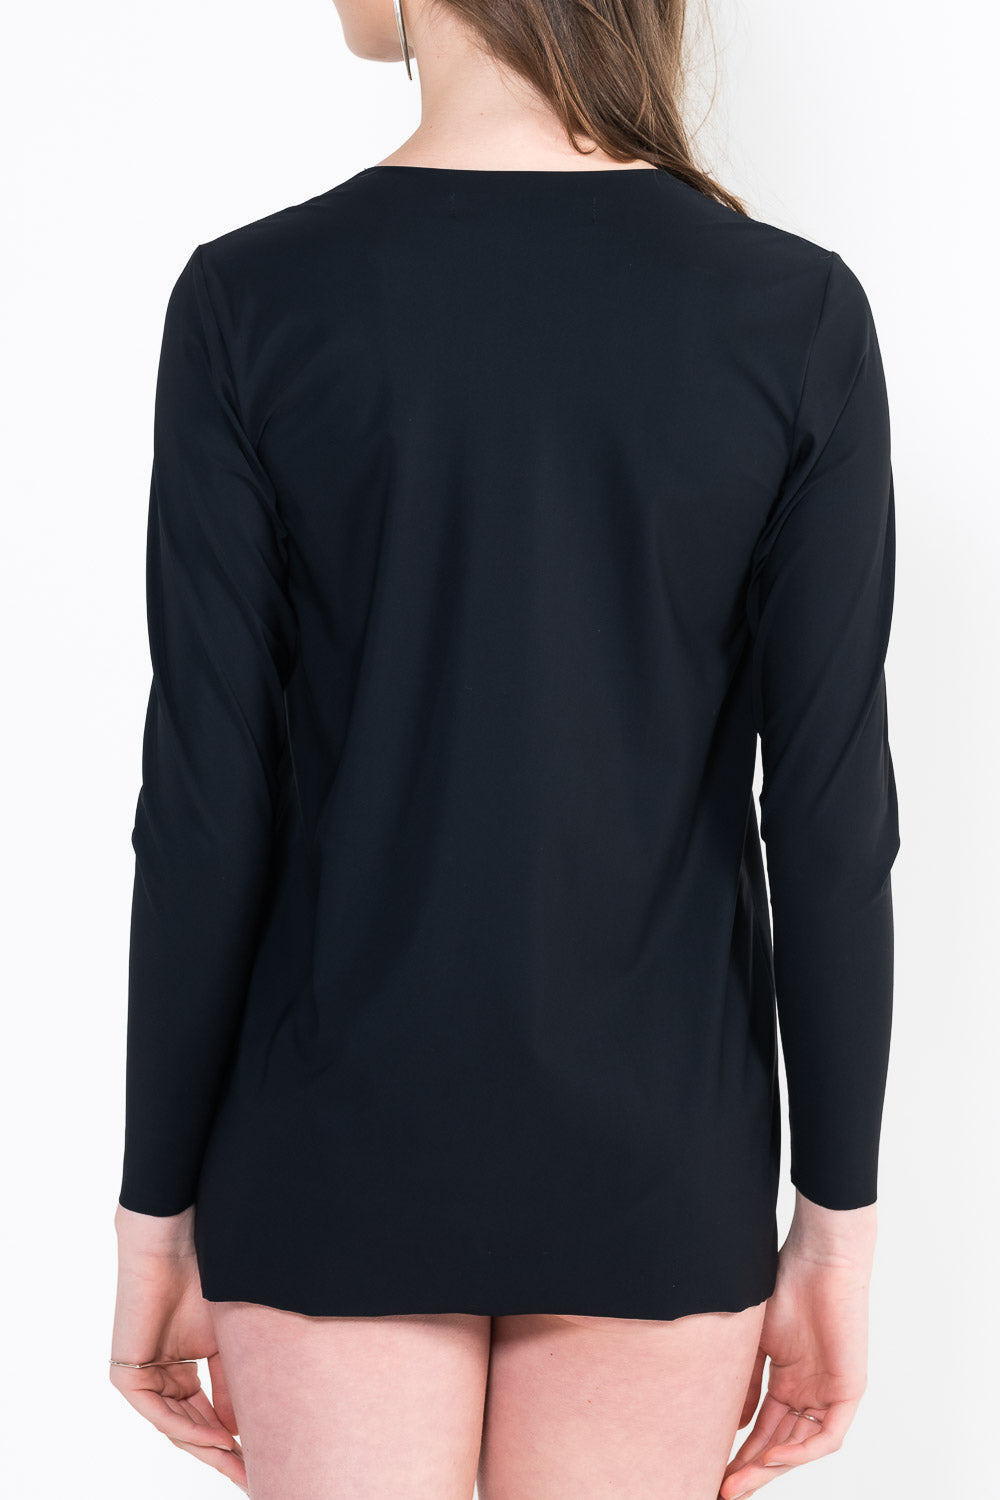 L34 Wide long-sleeved top